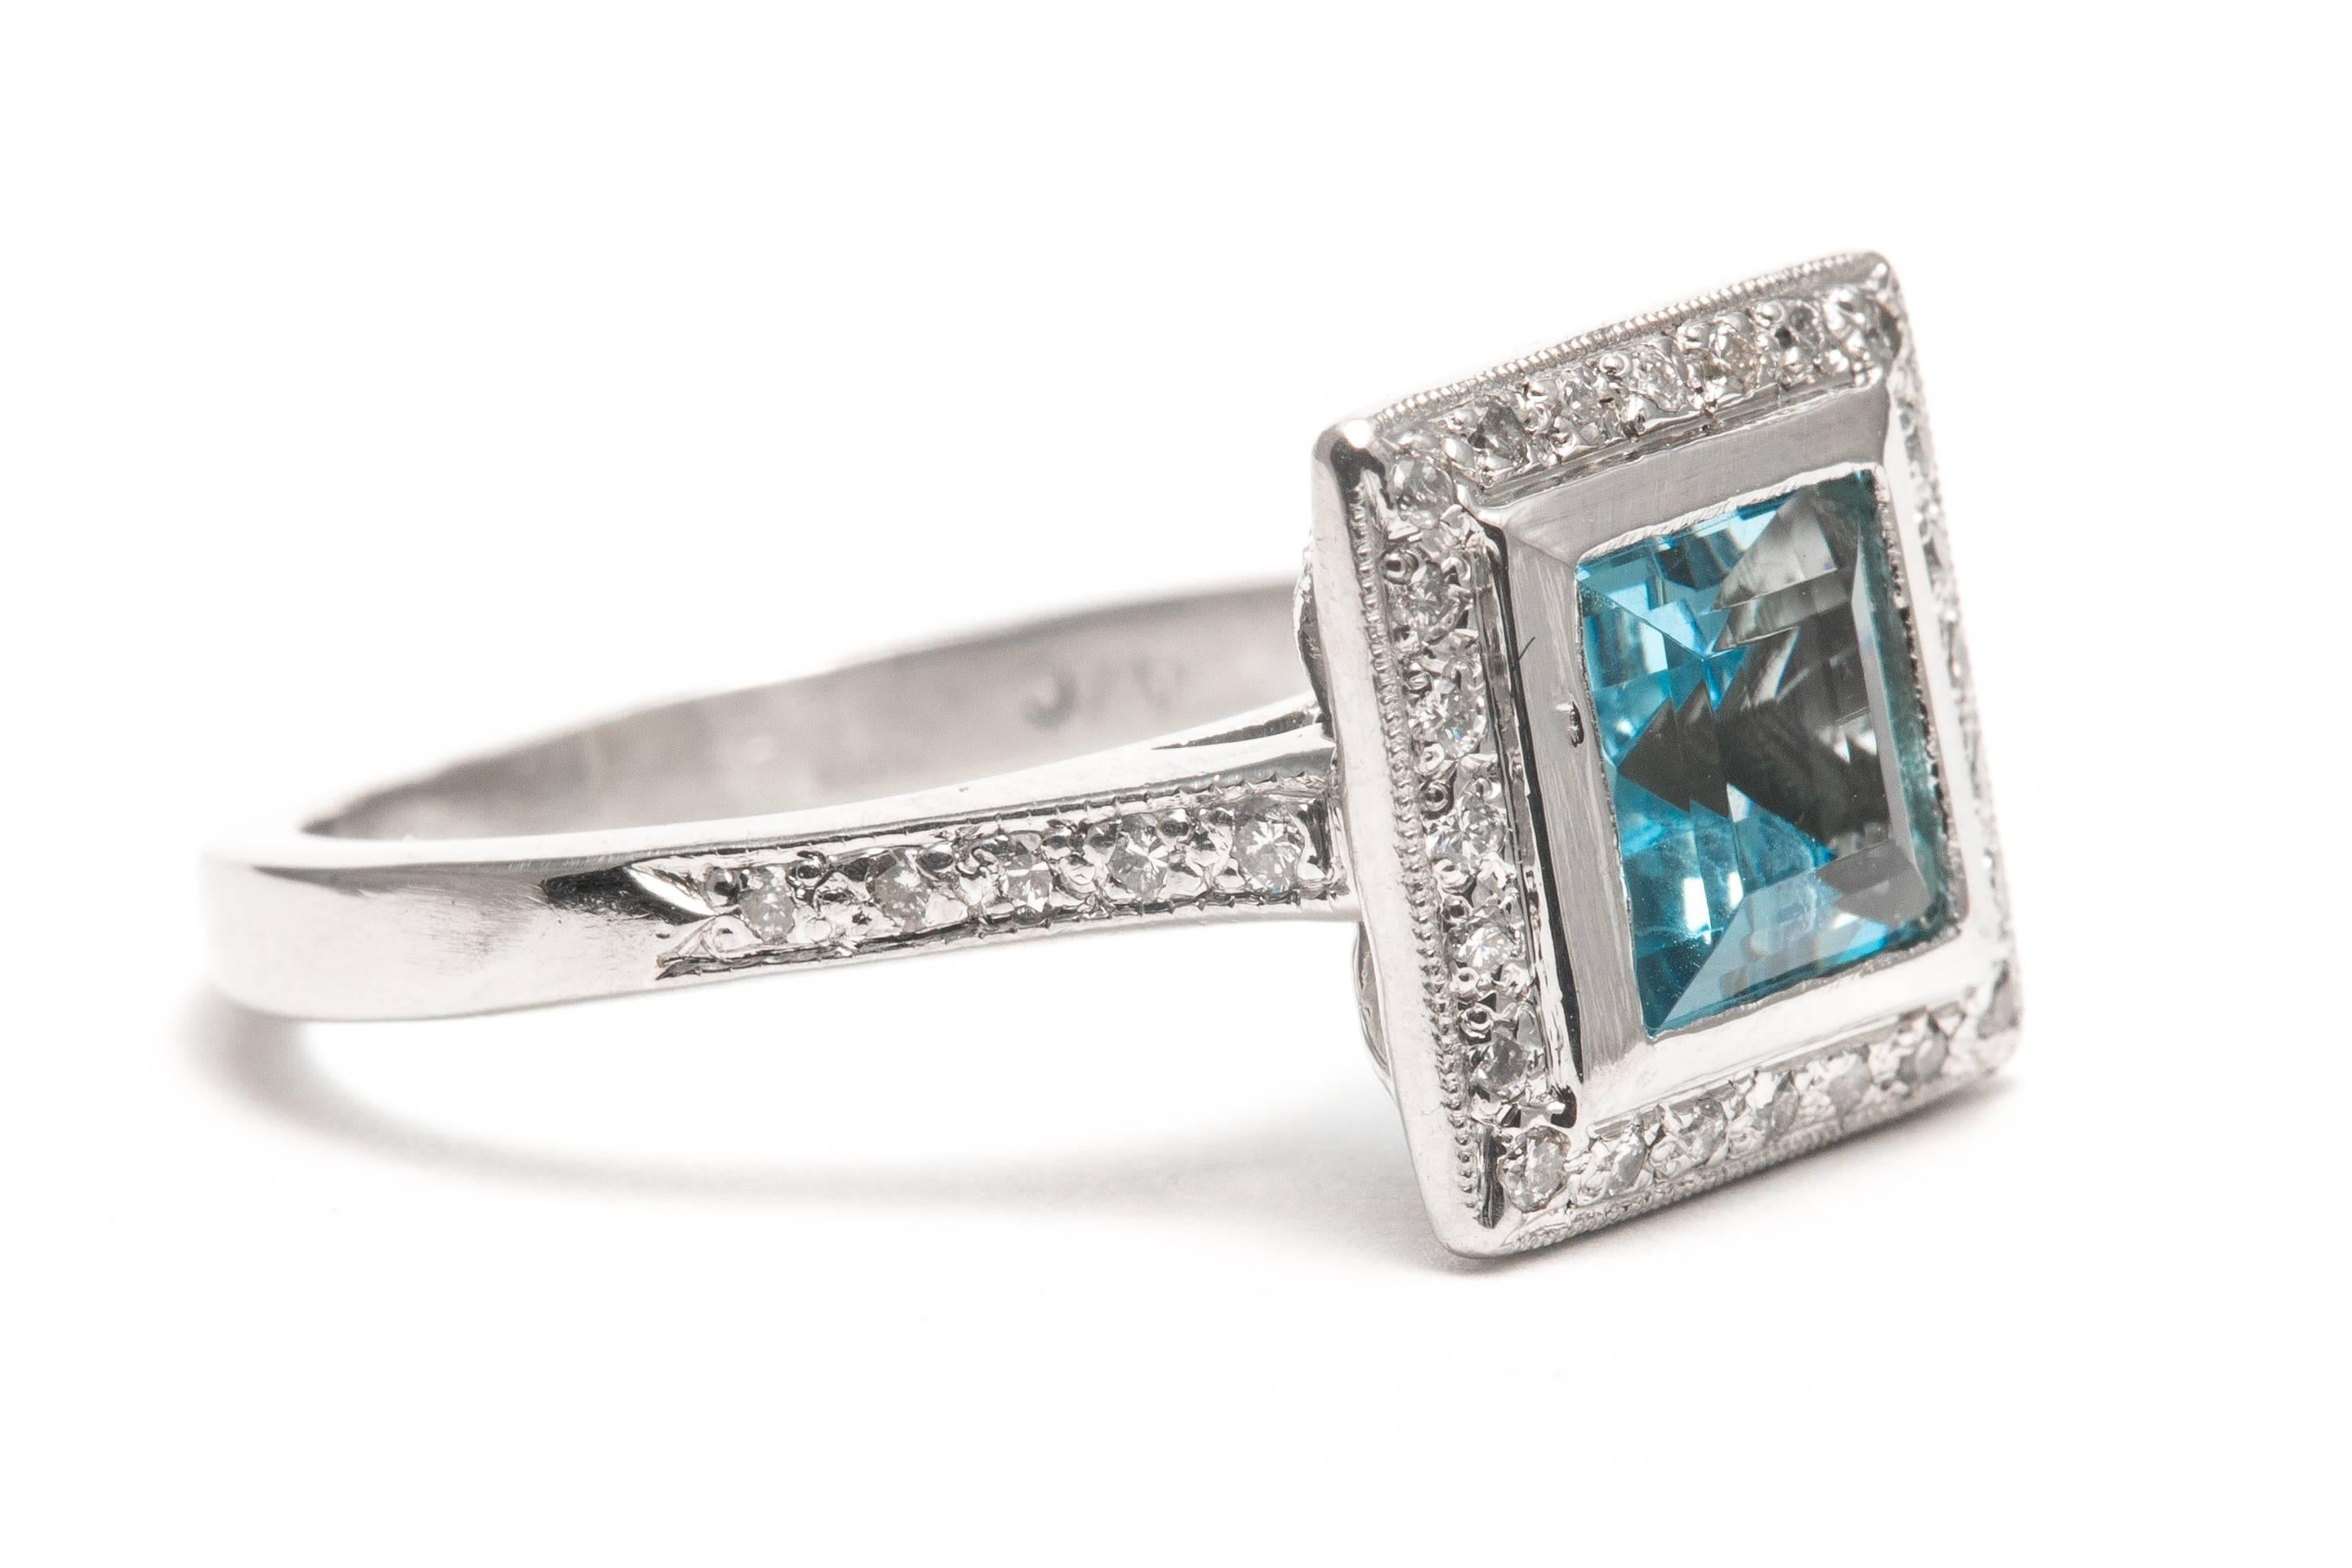 A beautiful aquamarine and diamond engagement style ring in luxurious platinum.   Centered by a 1.50 carat step cut aquamarine, this ring would make a wonderful March birthstone or promise ring that can later be used to hold a diamond.

Grading as